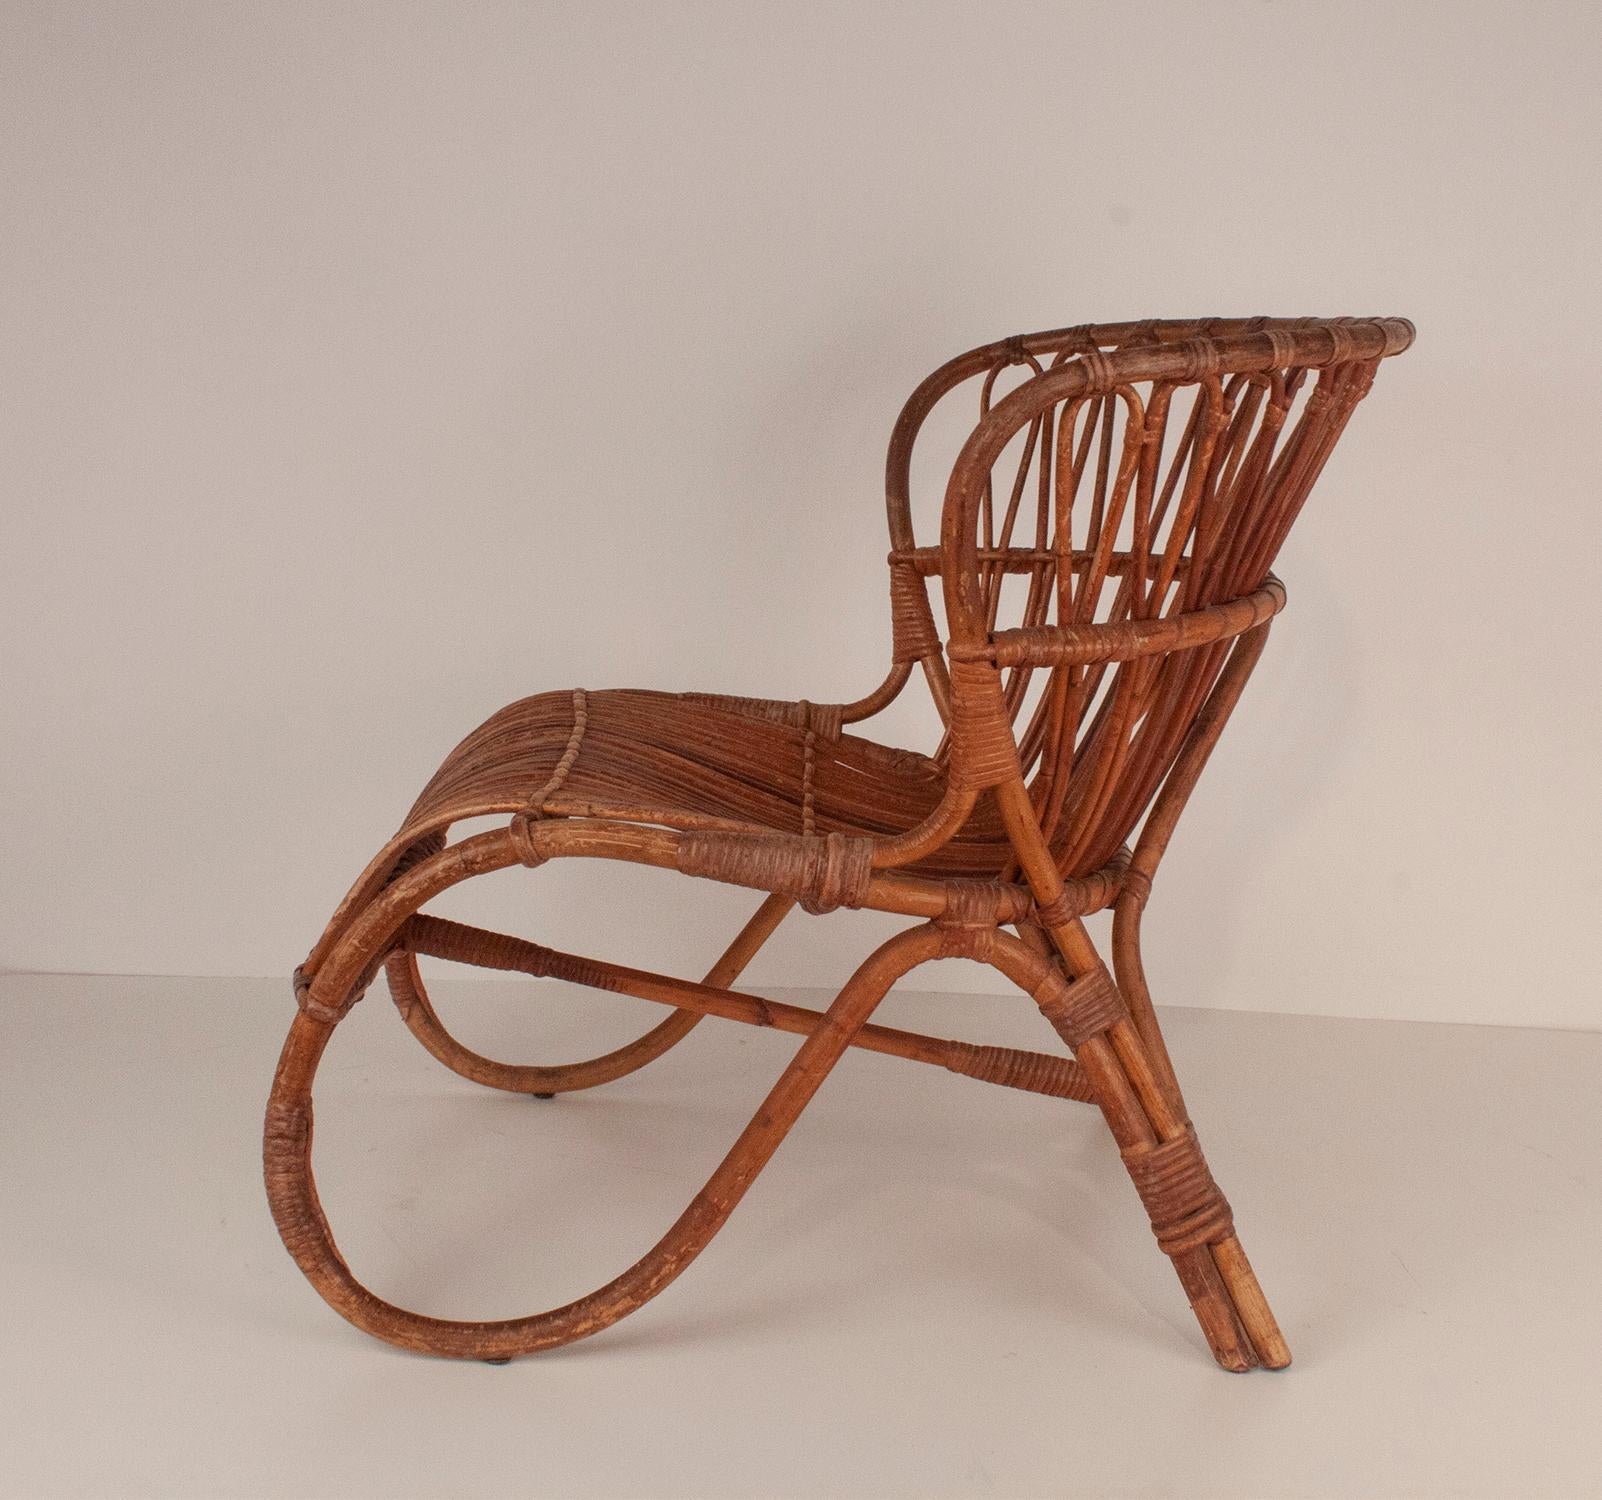 Mid-20th Century Bamboo and Rattan Armchair in the Style of Viggo Boesen, Netherlands 50's For Sale